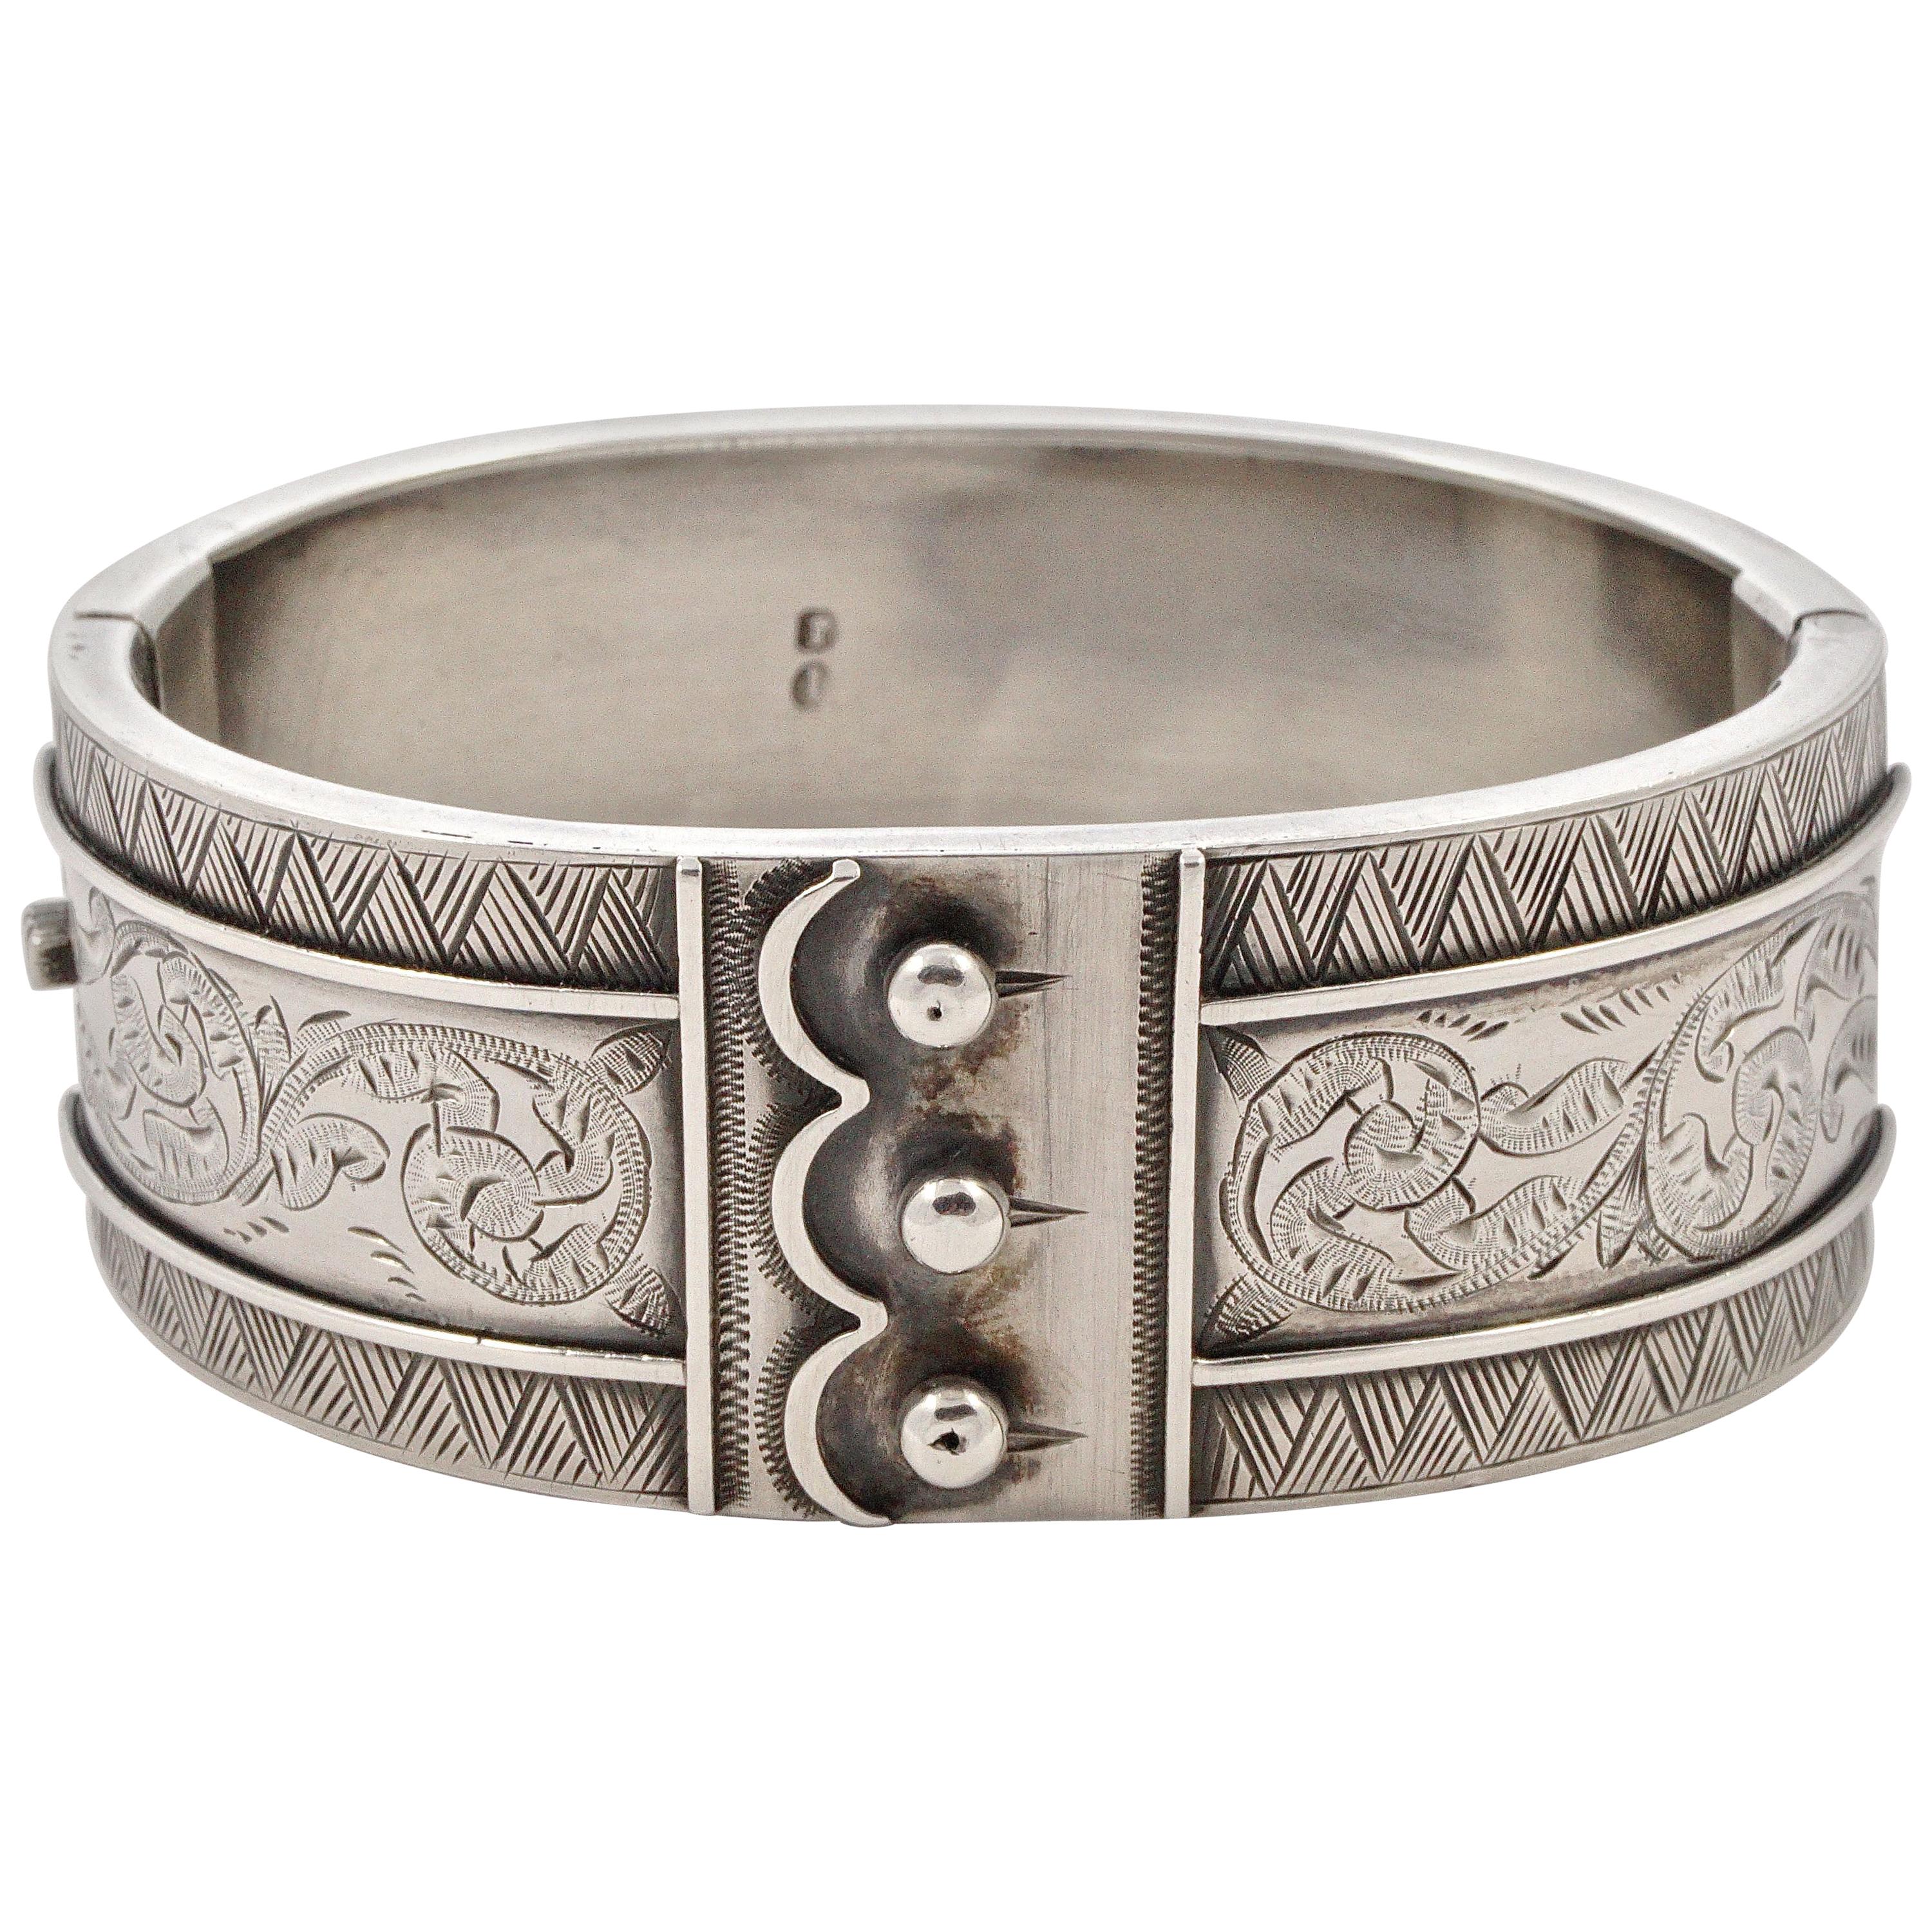 English Victorian Sterling Silver Triple Button Cuff Engraved Bangle Bracelet